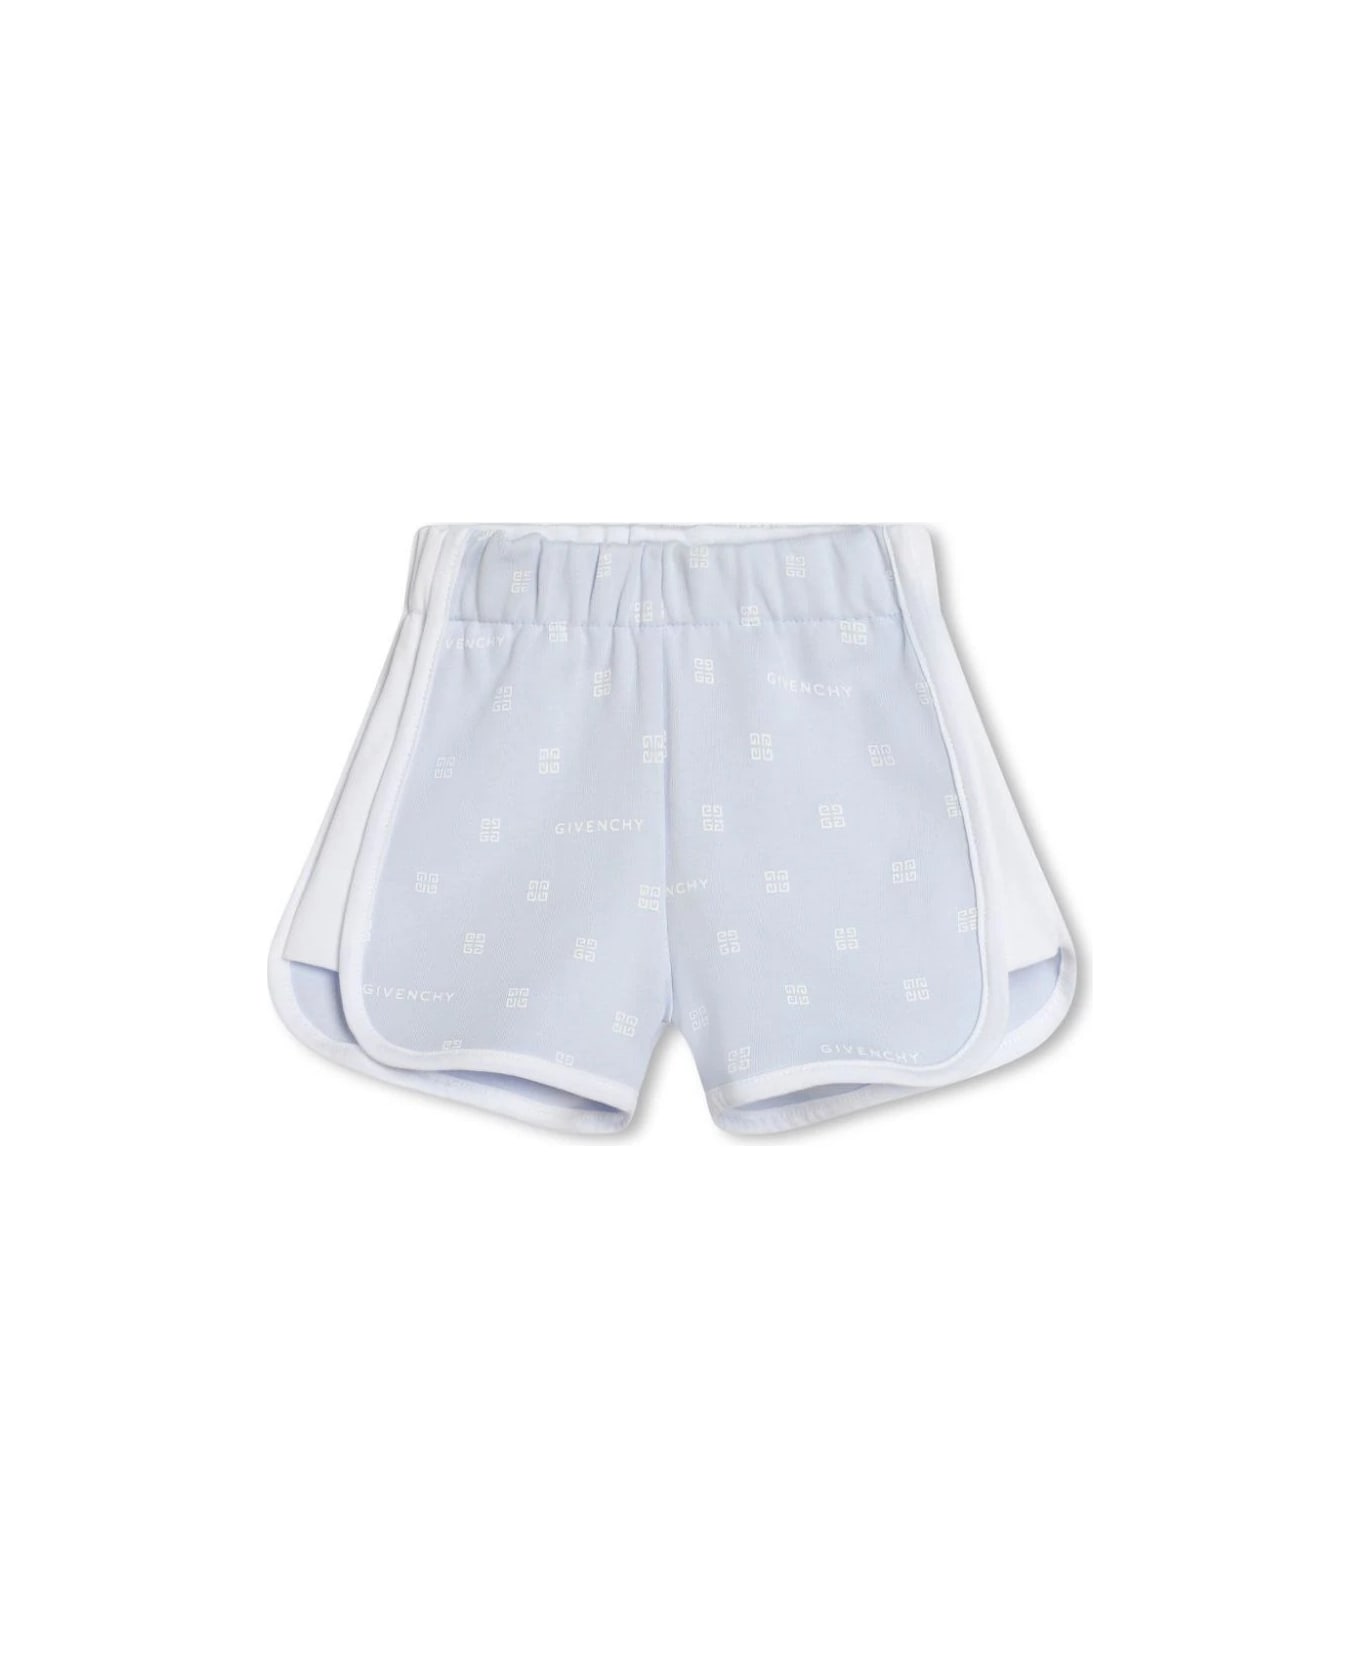 Givenchy Low White And Light Blue Set With T-shirt, Shorts And Bandana - Blue